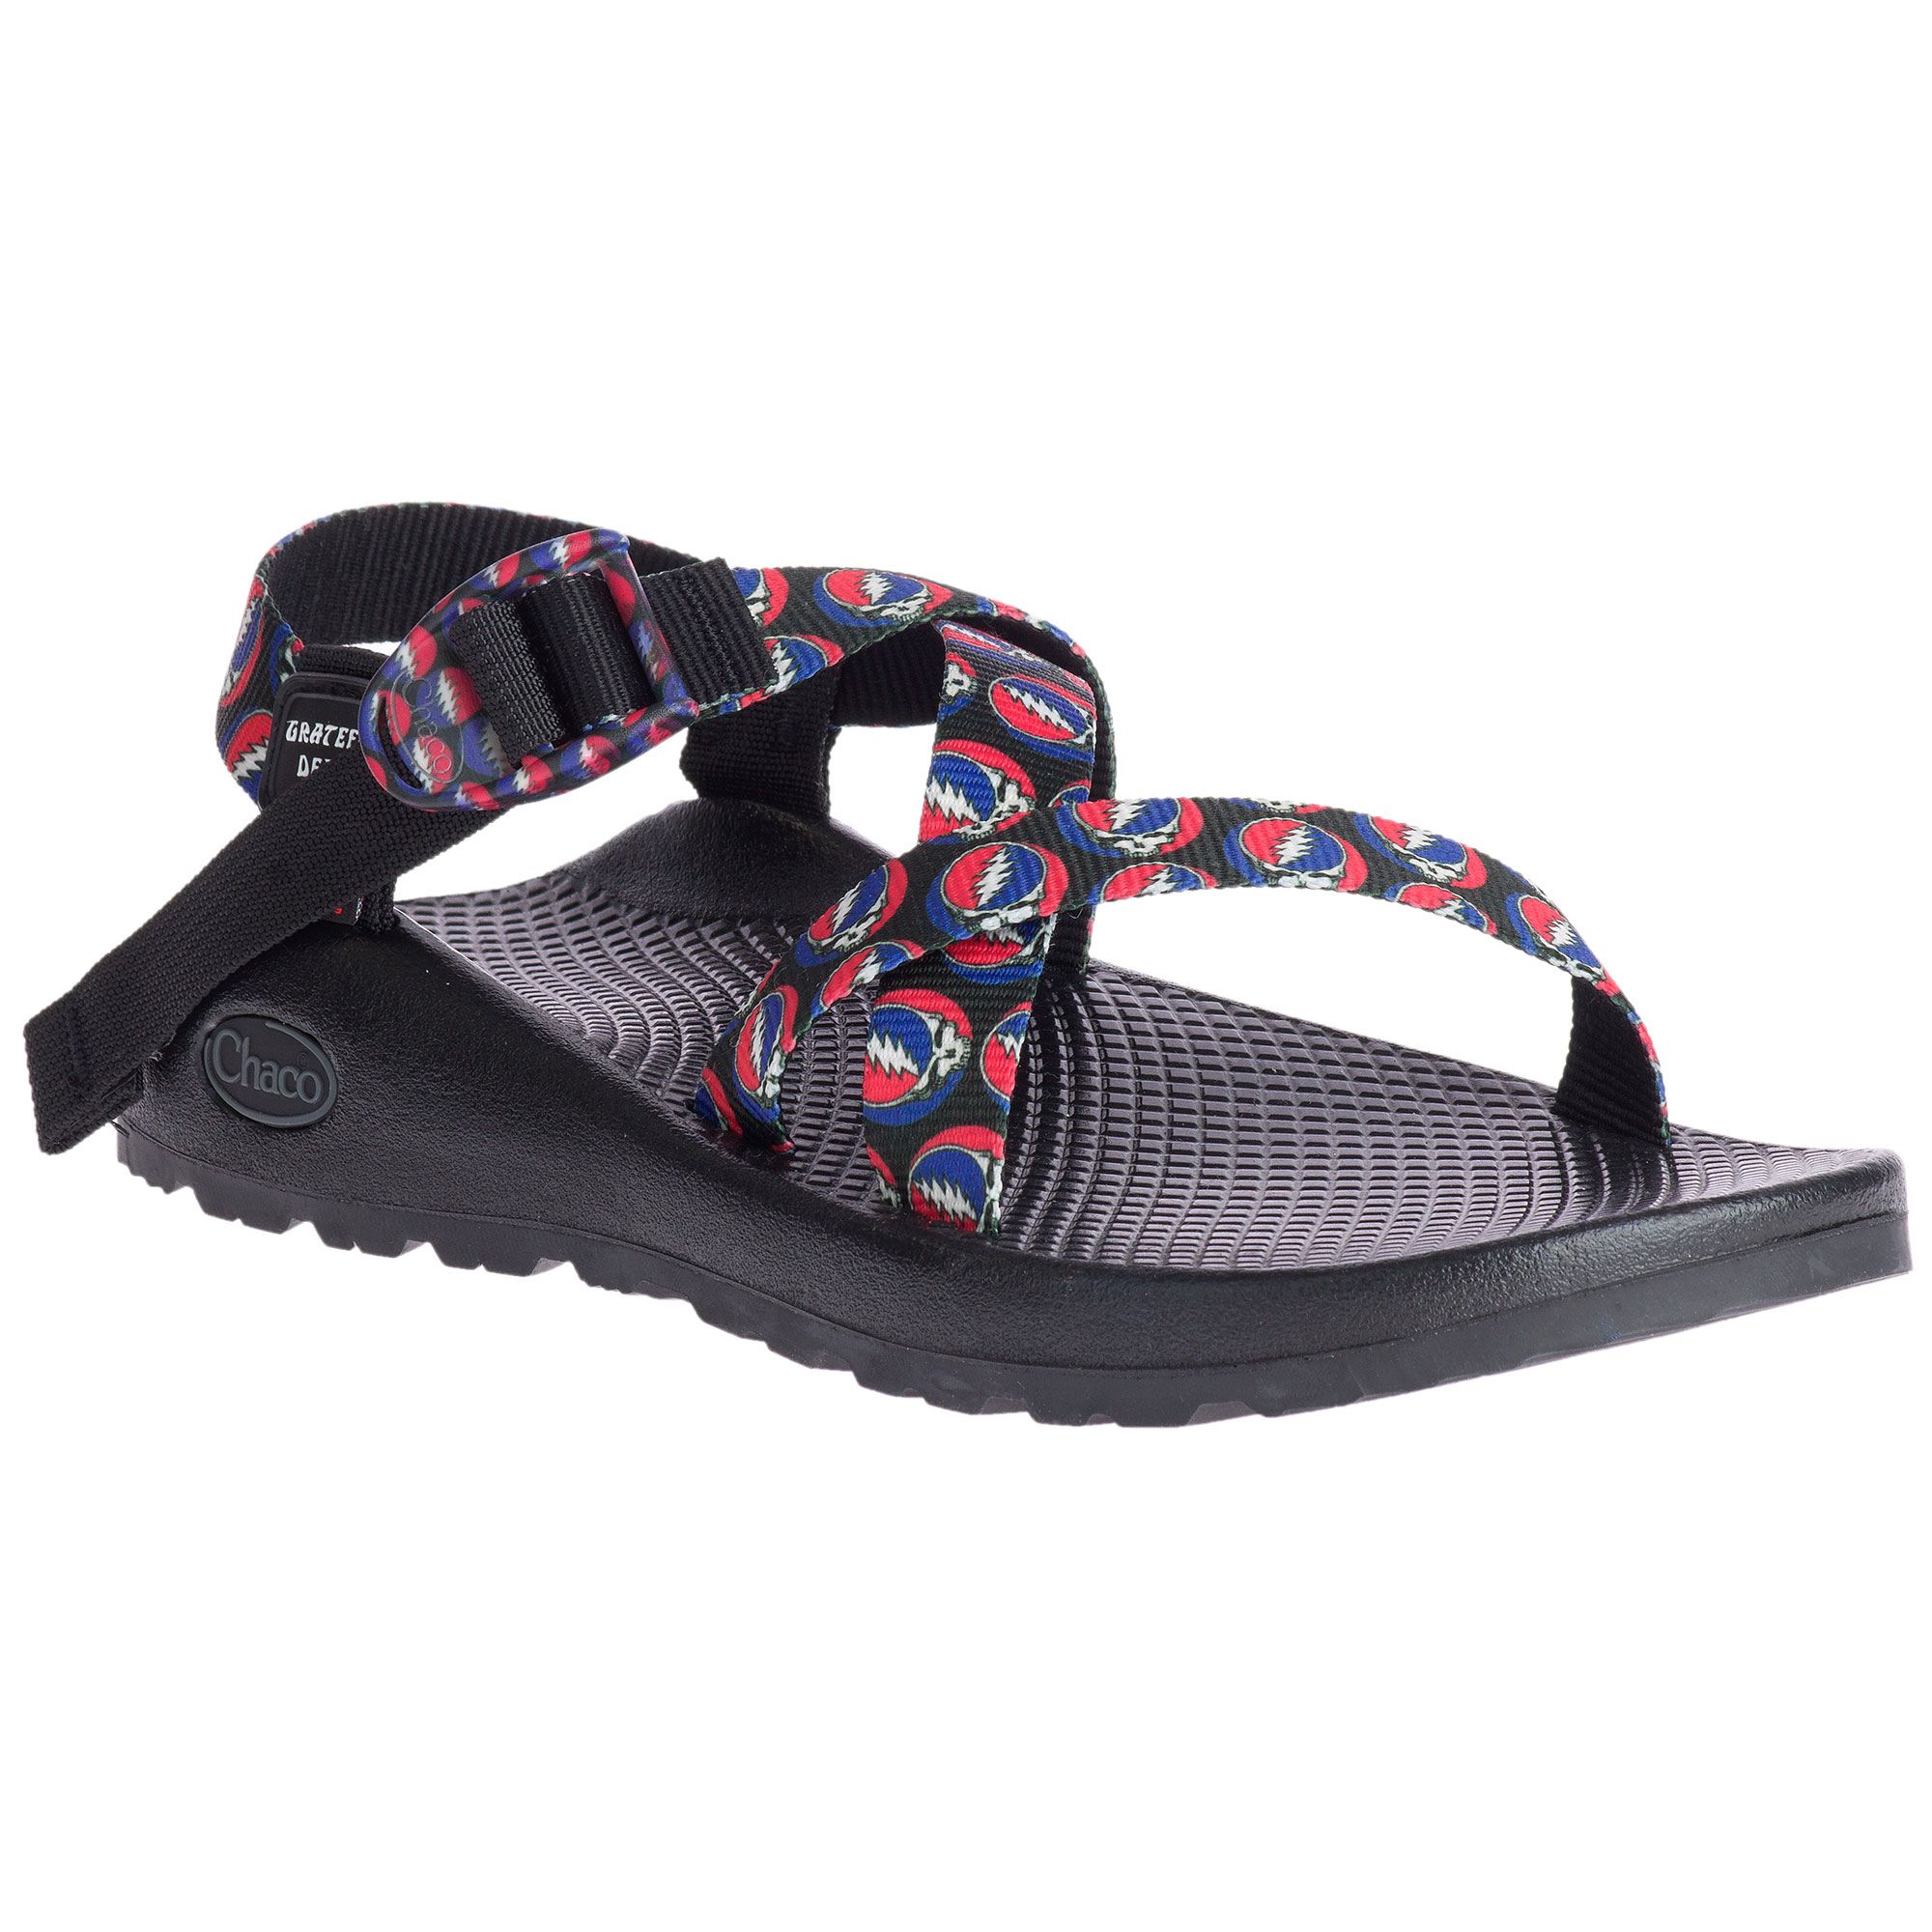 chaco steal your face